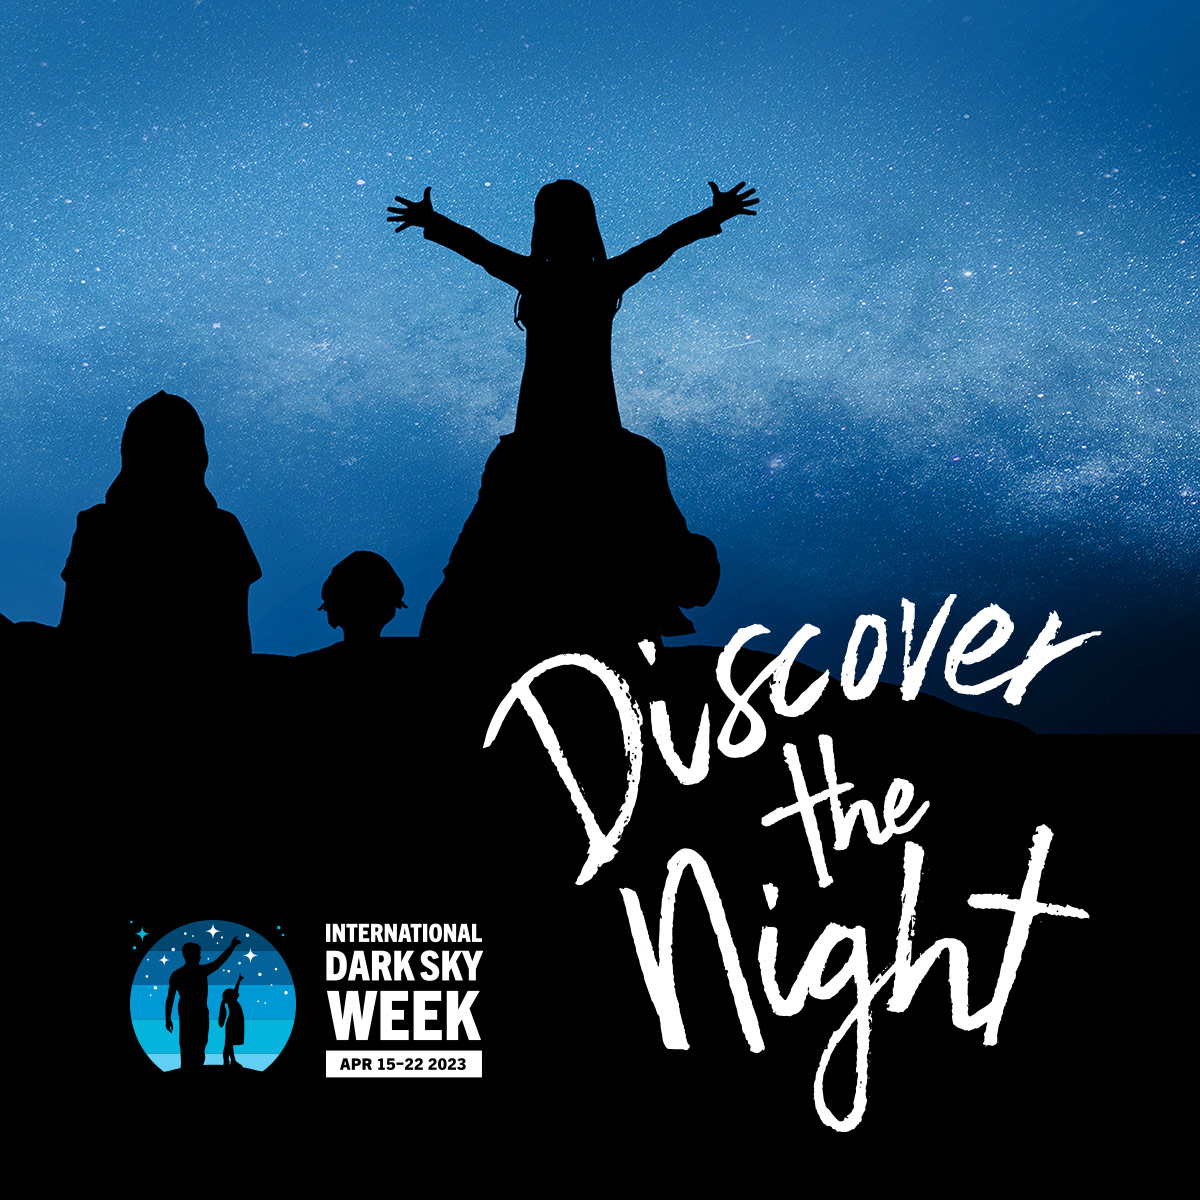 This International Dark Sky Week, join the fight to protect the night by becoming an IDA Advocate.
darksky.org/our-work/grass… #IDSW2023 #DiscoverTheNight